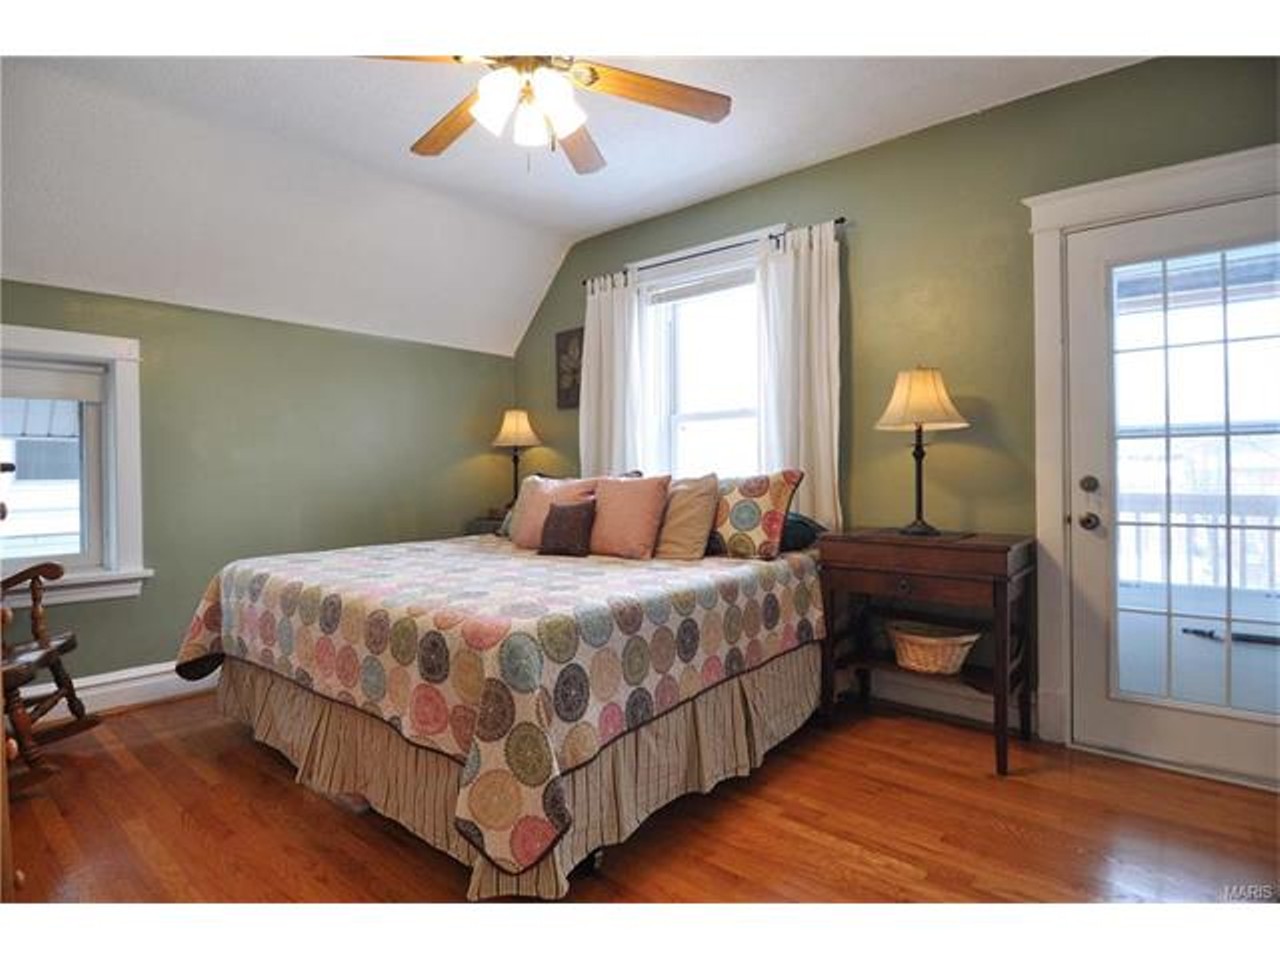 Walk upstairs, and you&#146;ll find three bedrooms. There is an updated full bath as well.